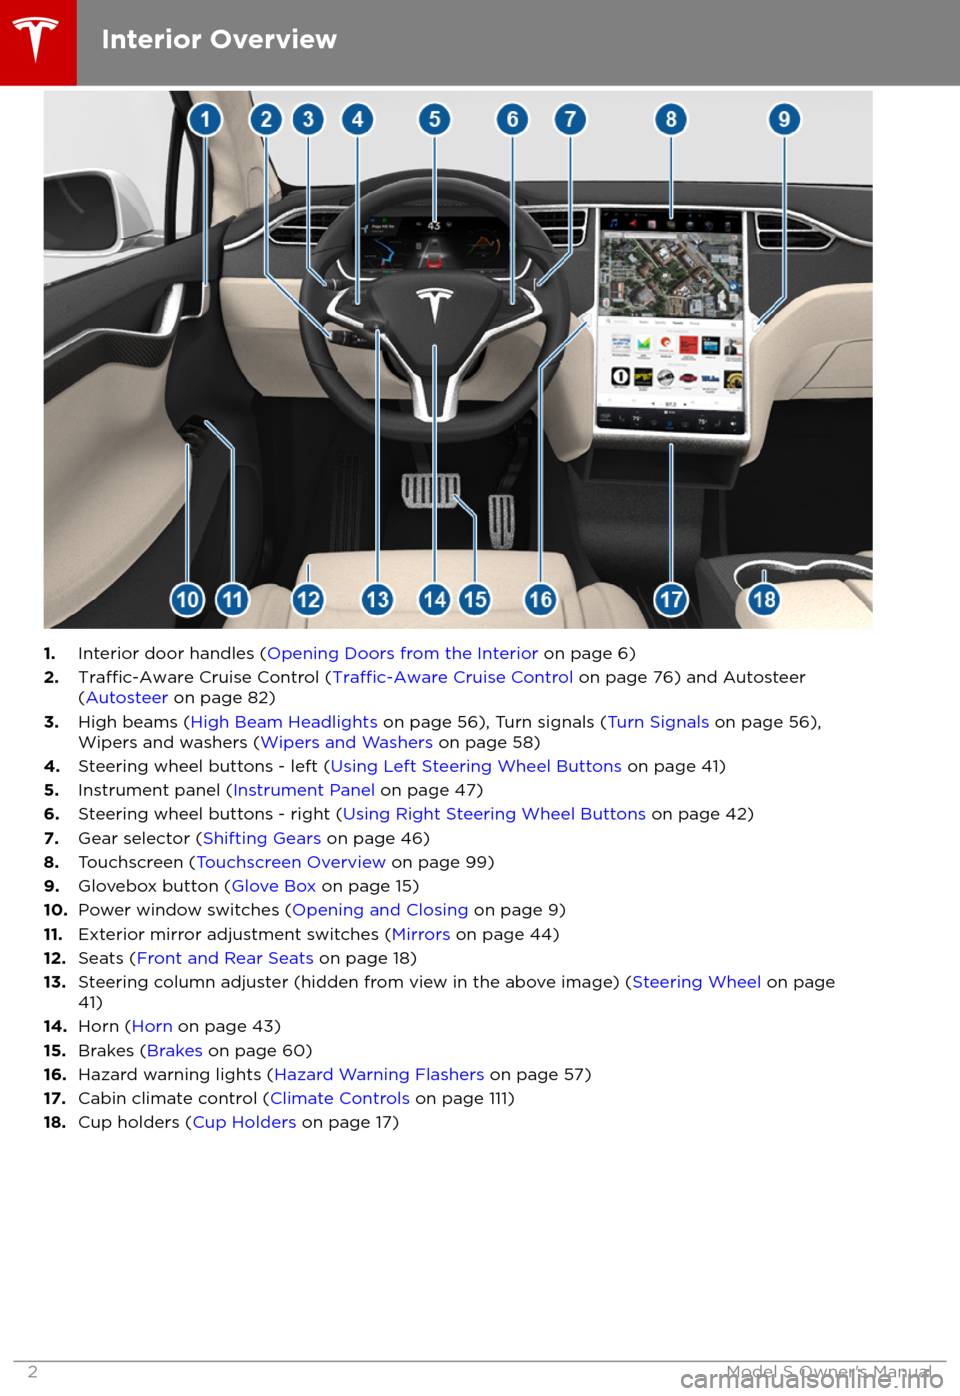 TESLA MODEL S 2018  Owners Manual  1.Interior door handles ( Opening Doors from the Interior  on page 6)
2.Traffic-Aware Cruise Control (Traffic-Aware Cruise Control  on page 76) and Autosteer
( Autosteer  on page 82)
3. High beams ( H